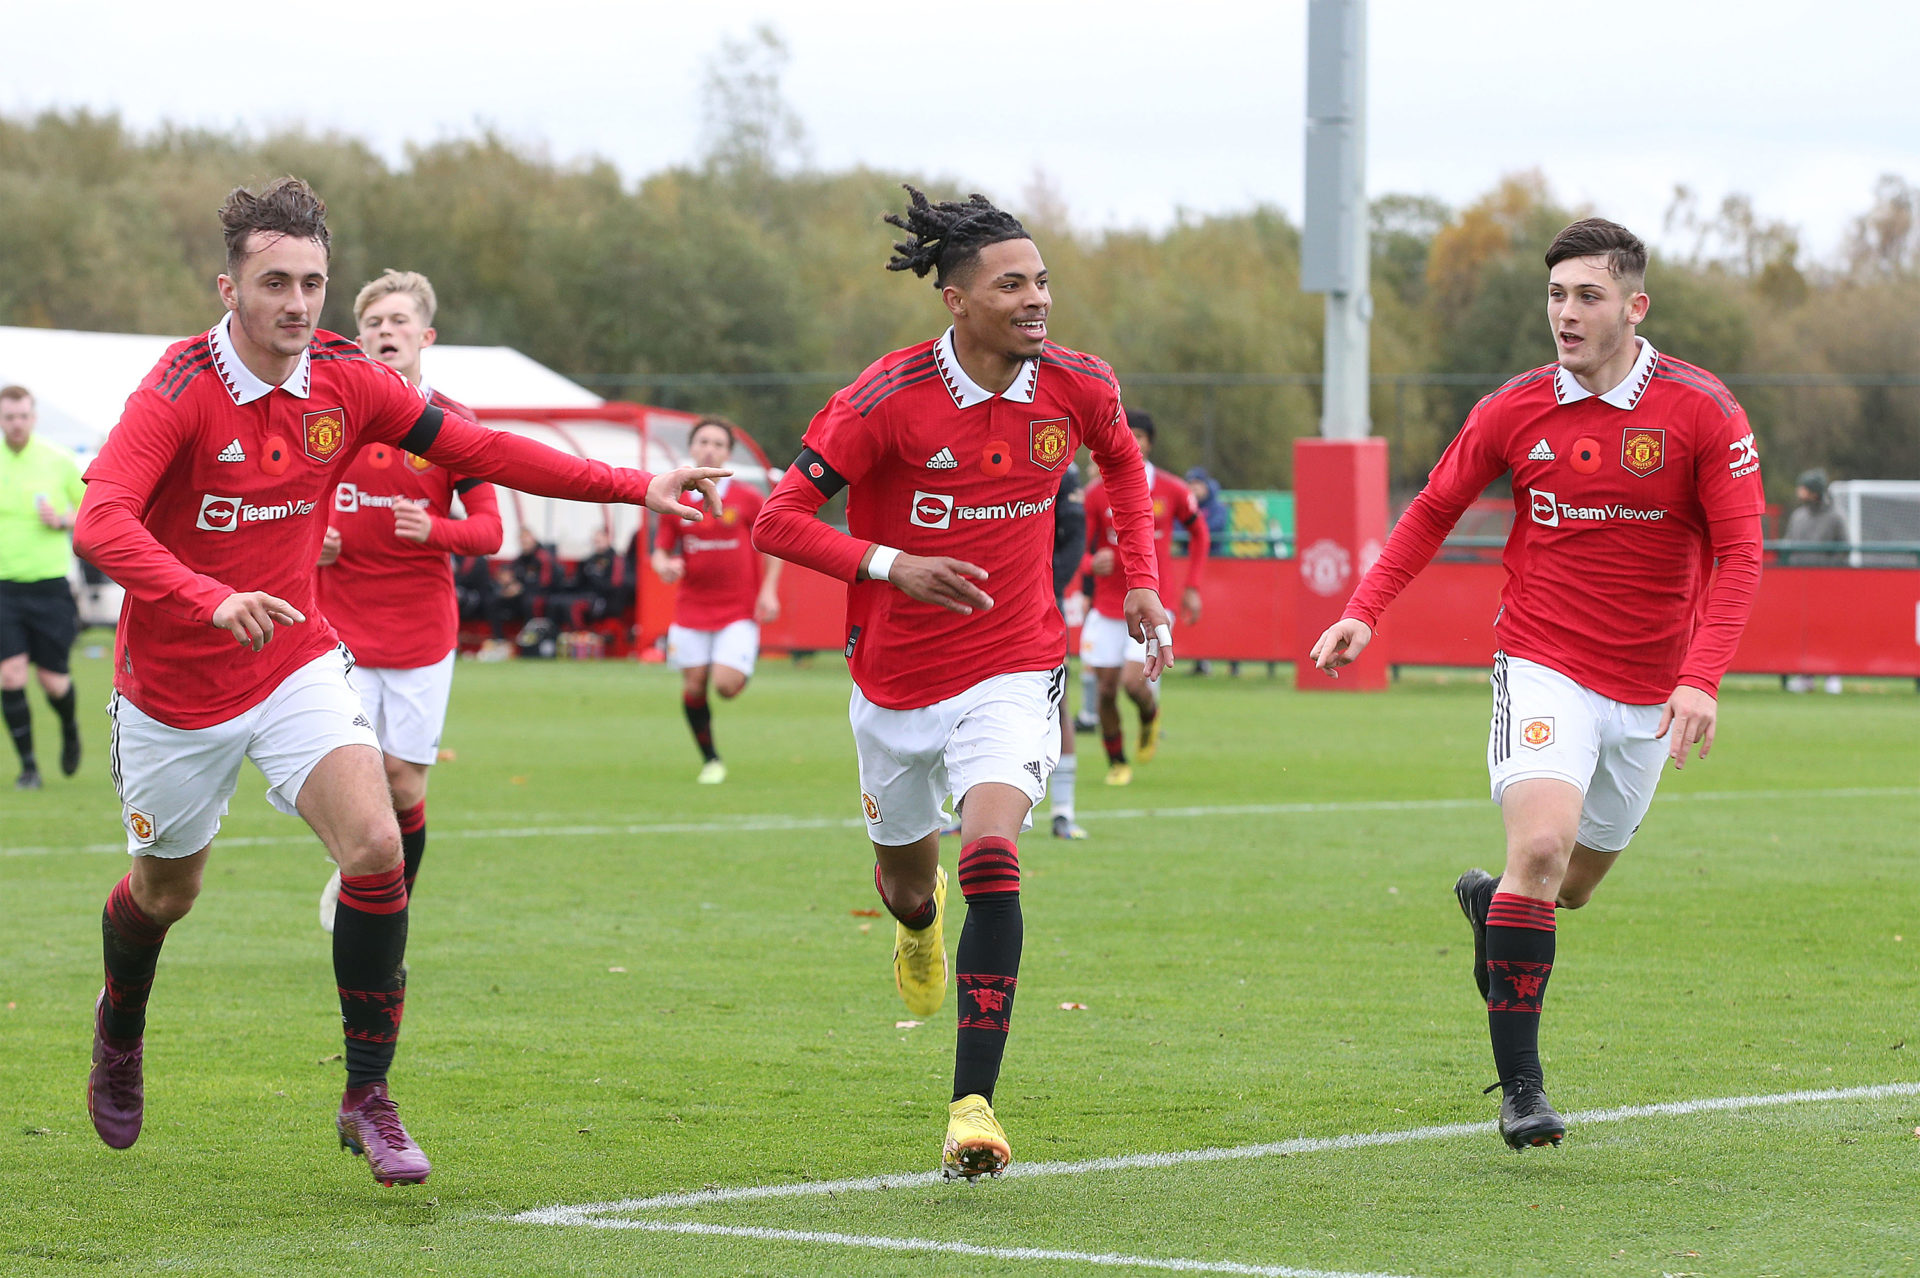 Ethan Williams in form for Manchester United u18s with 4 goals in 4 games